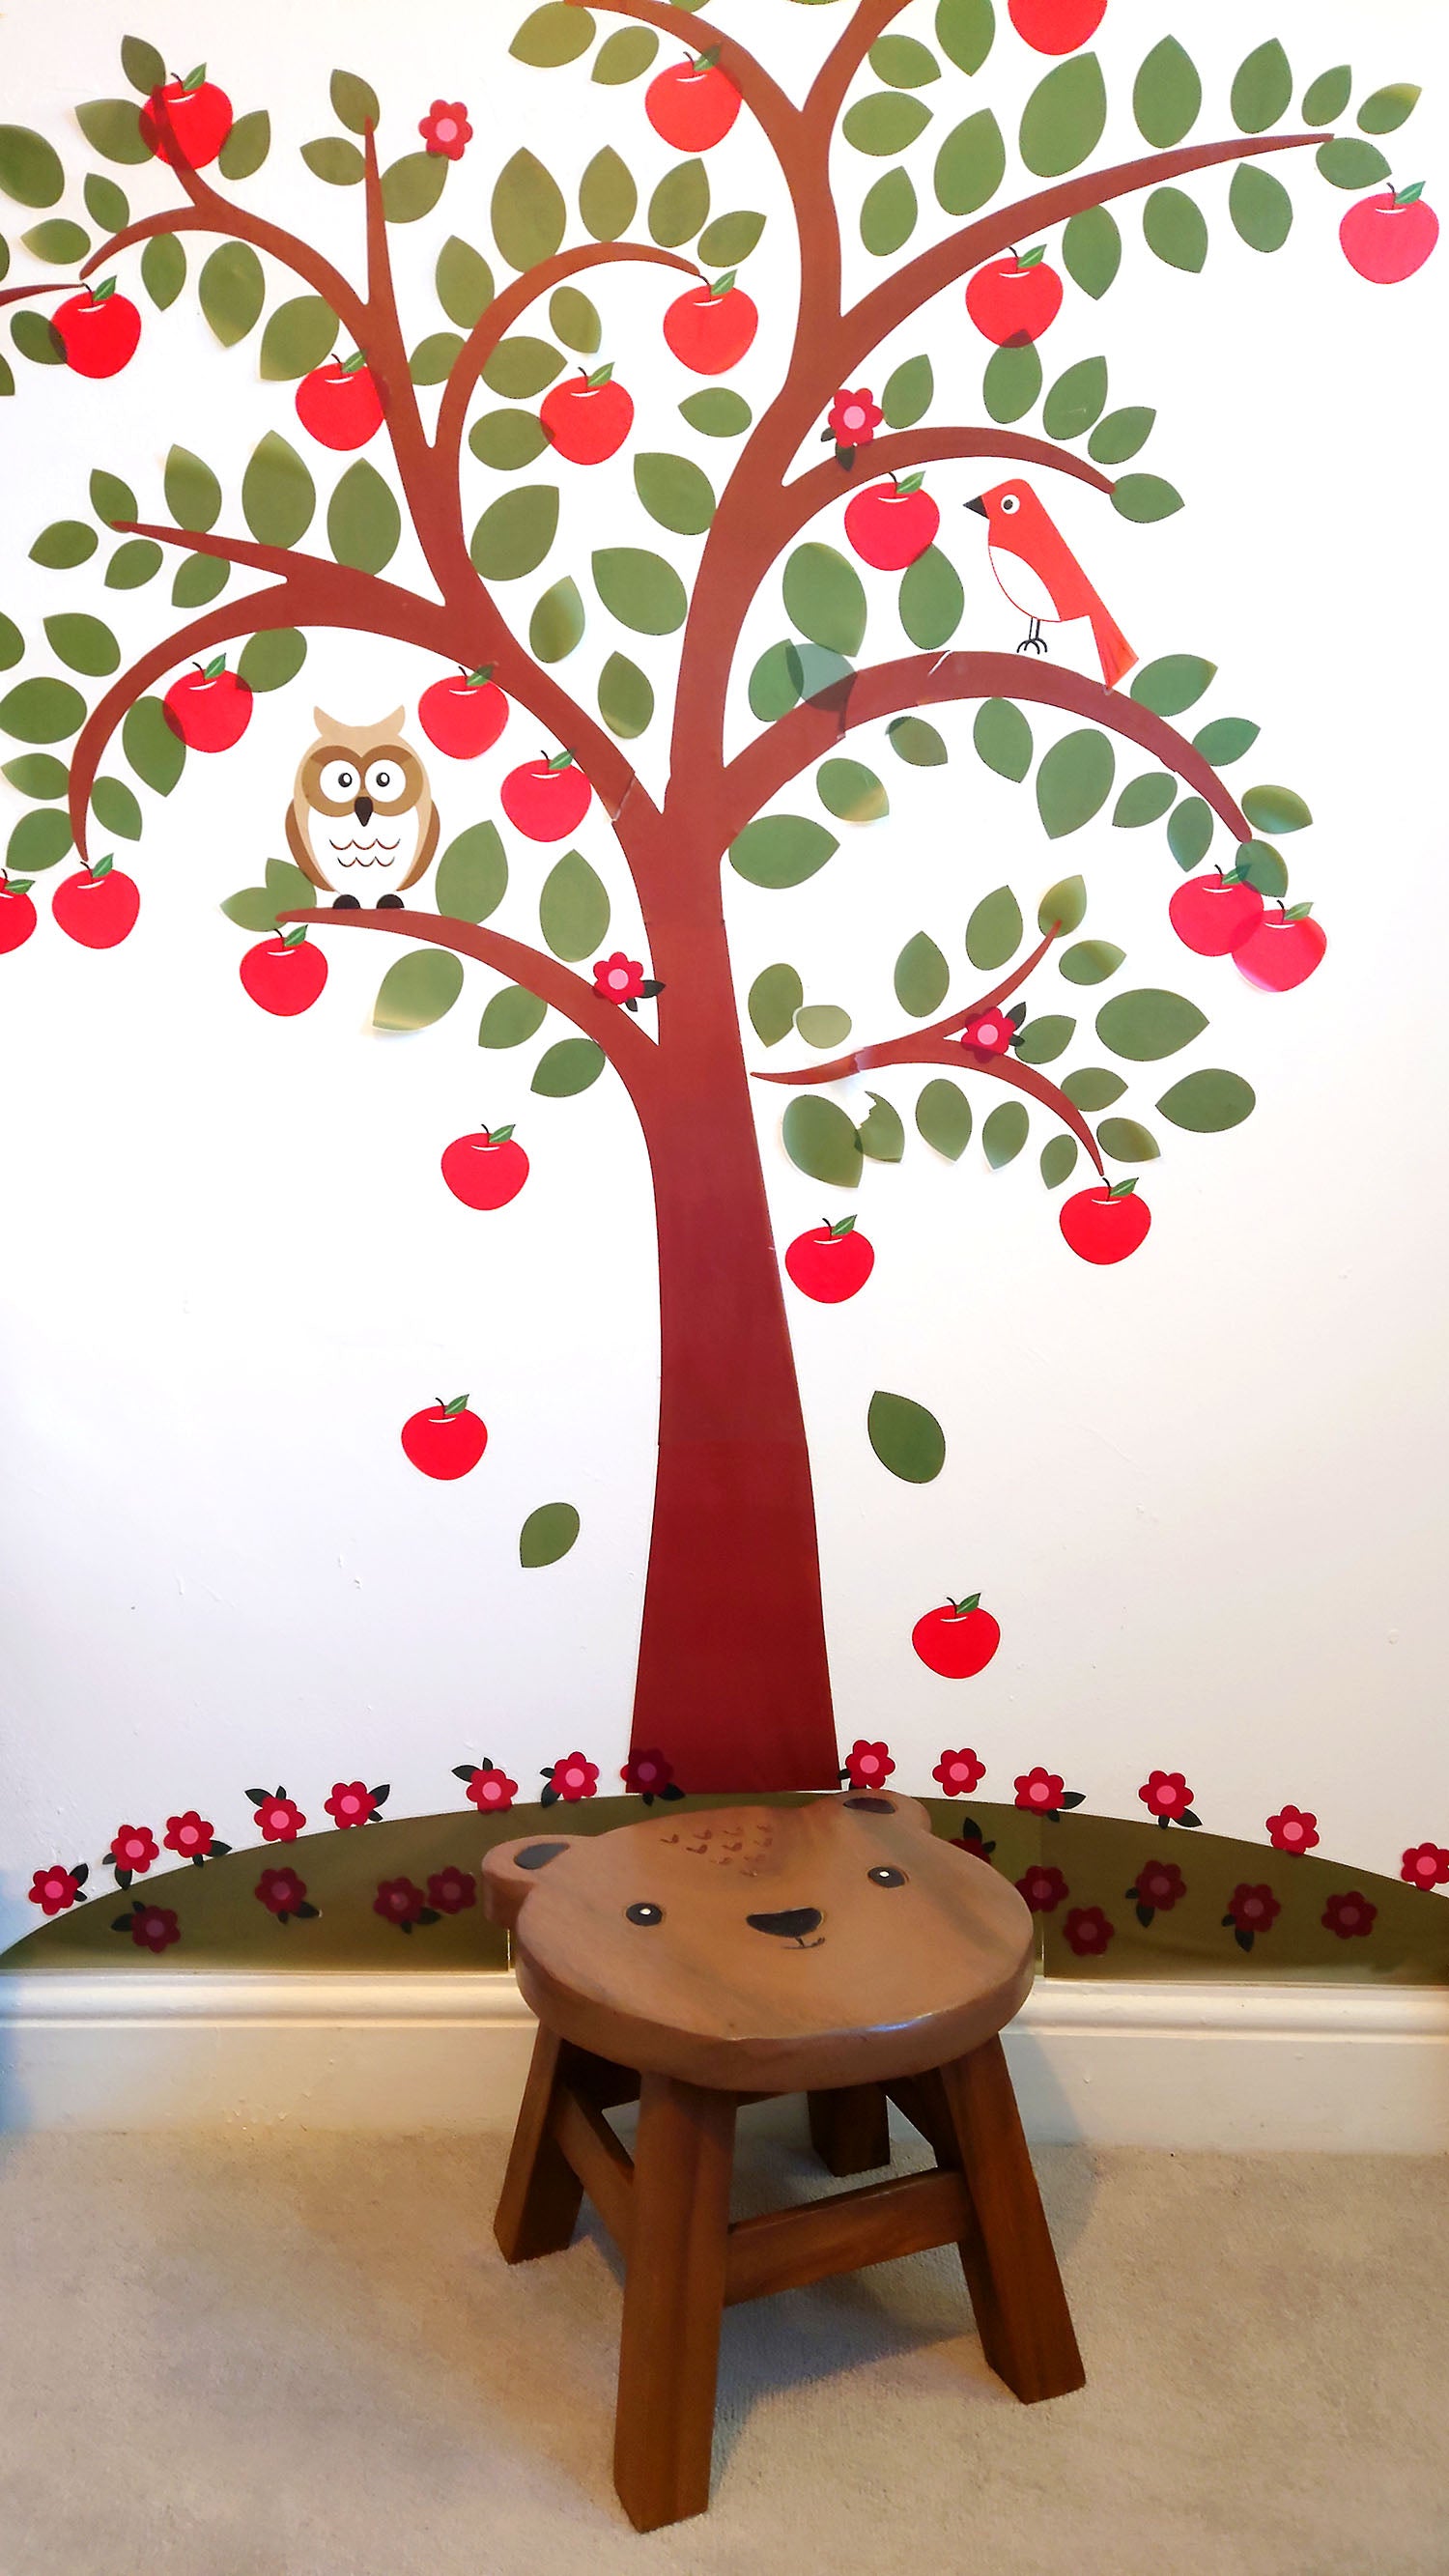 wooden footstool with bear design, in front of wall with tree painted on